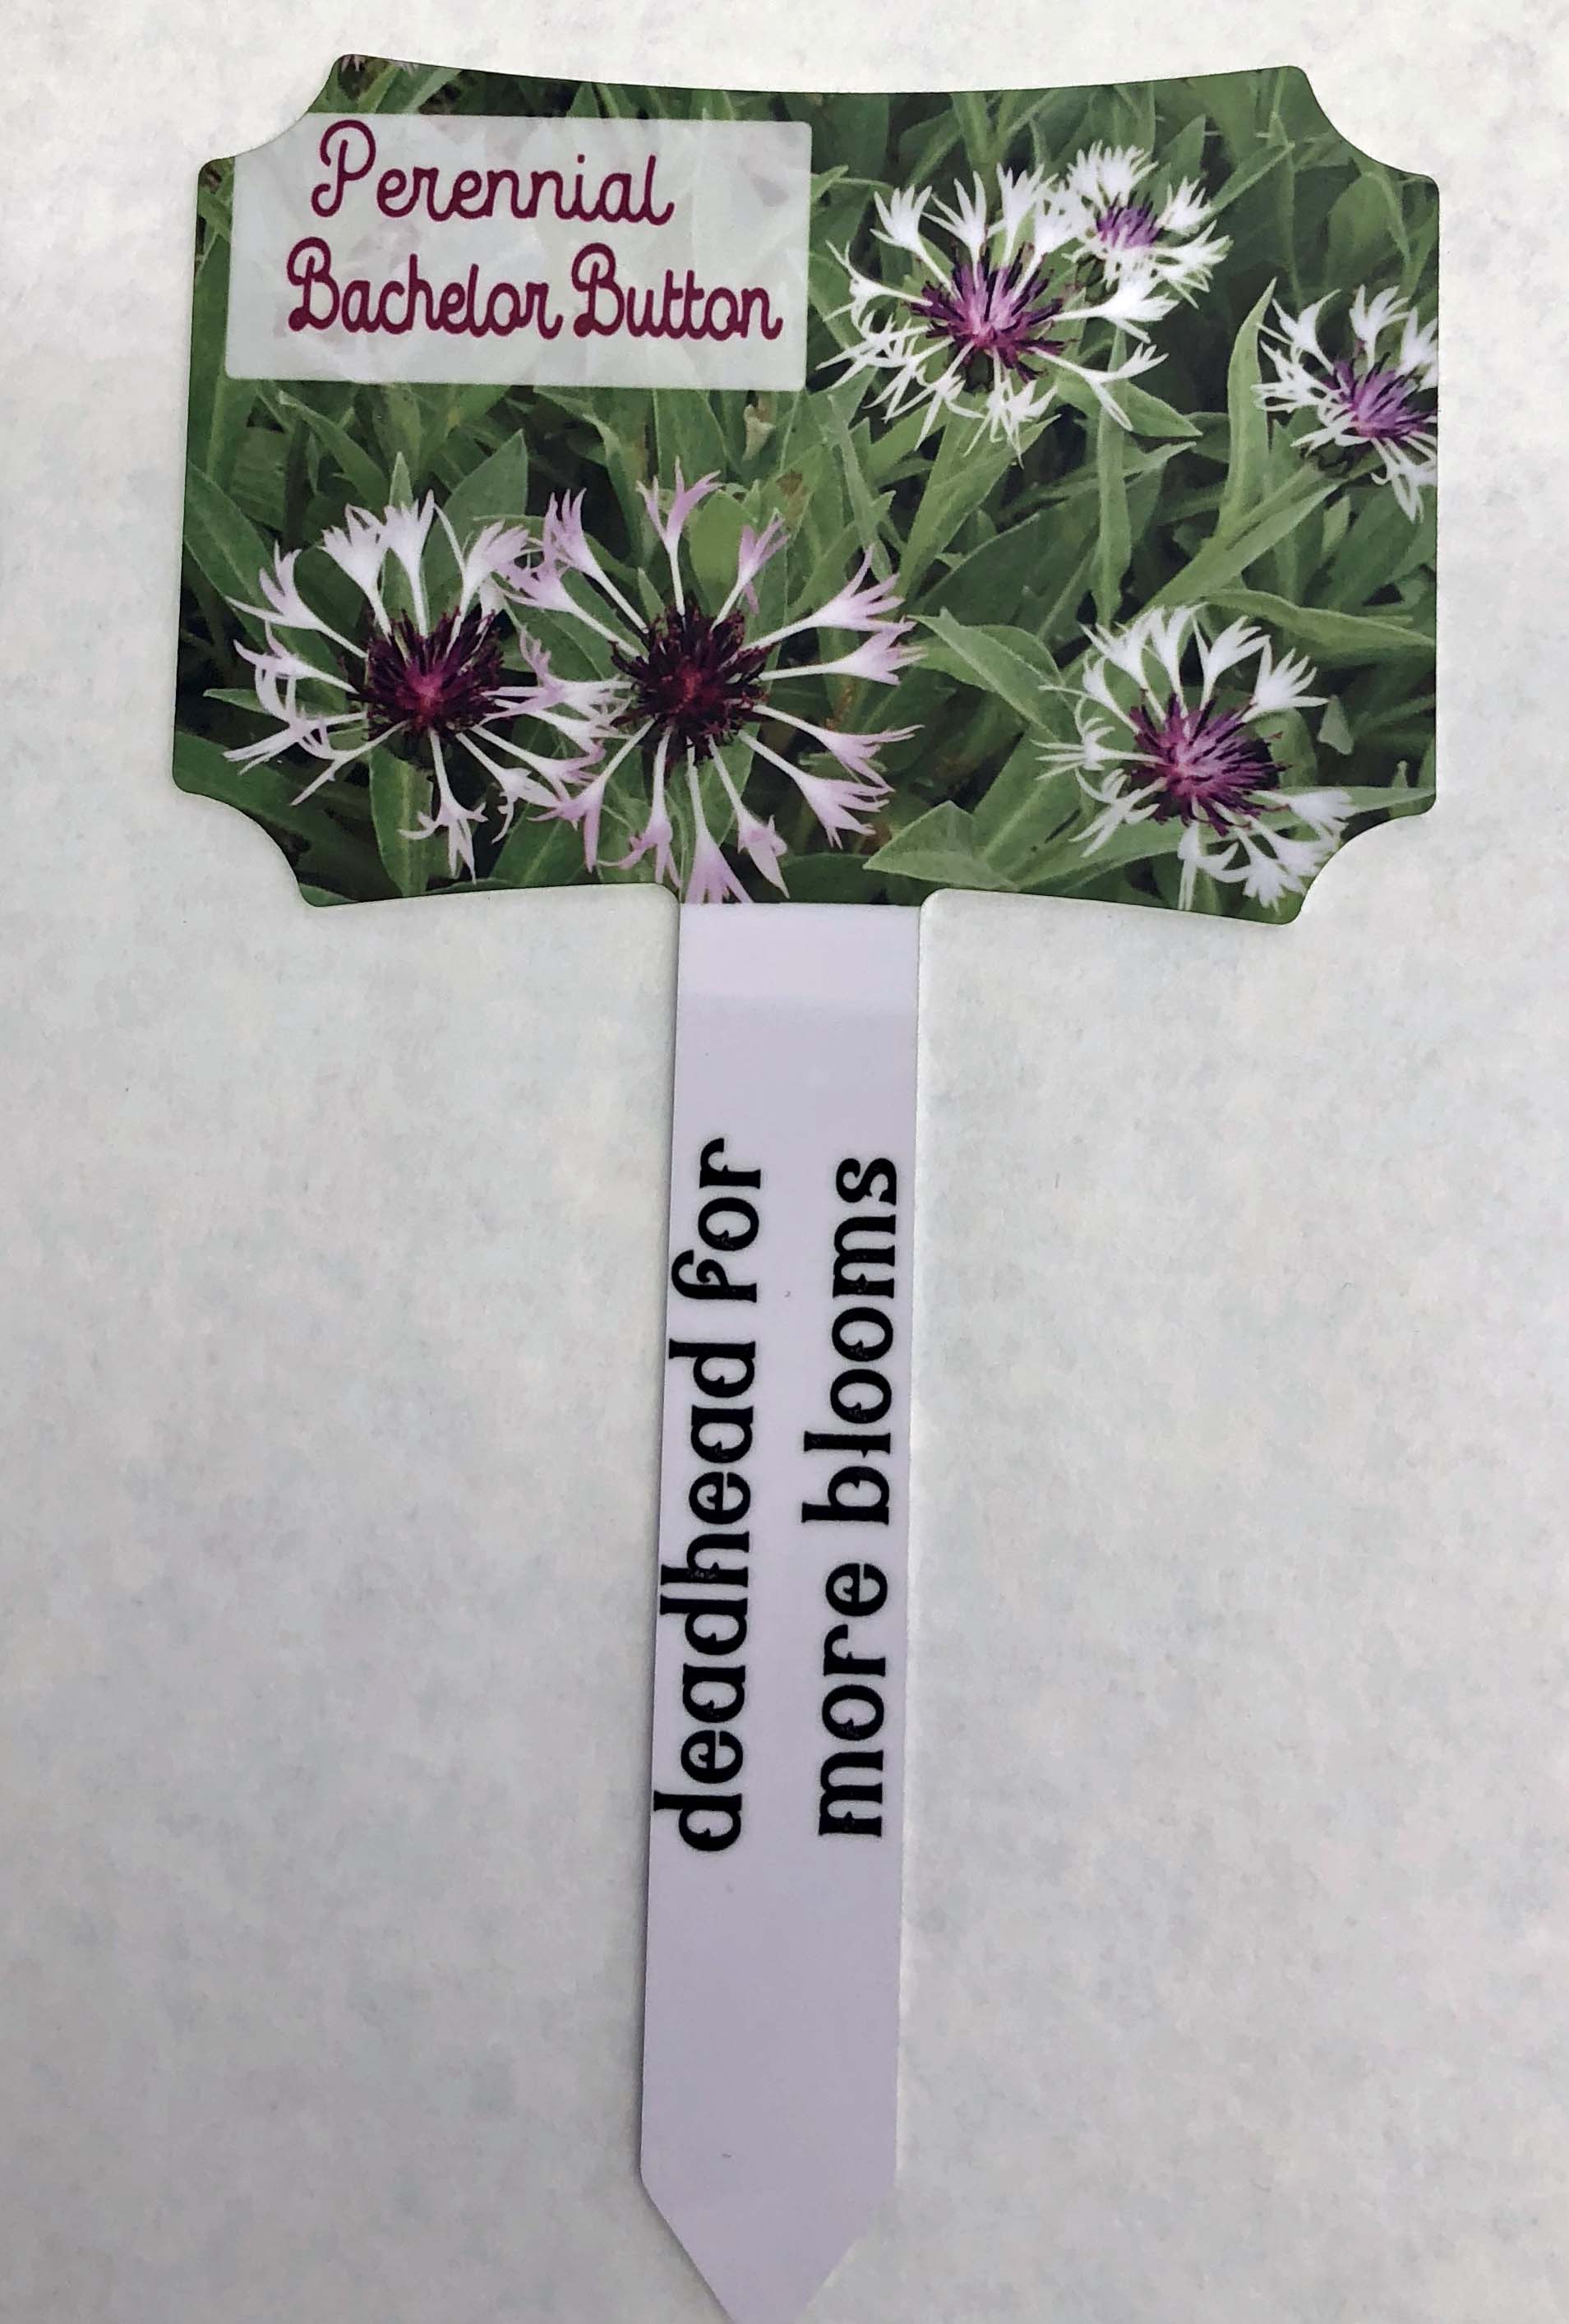 Perennial garden stake made with sublimation printing